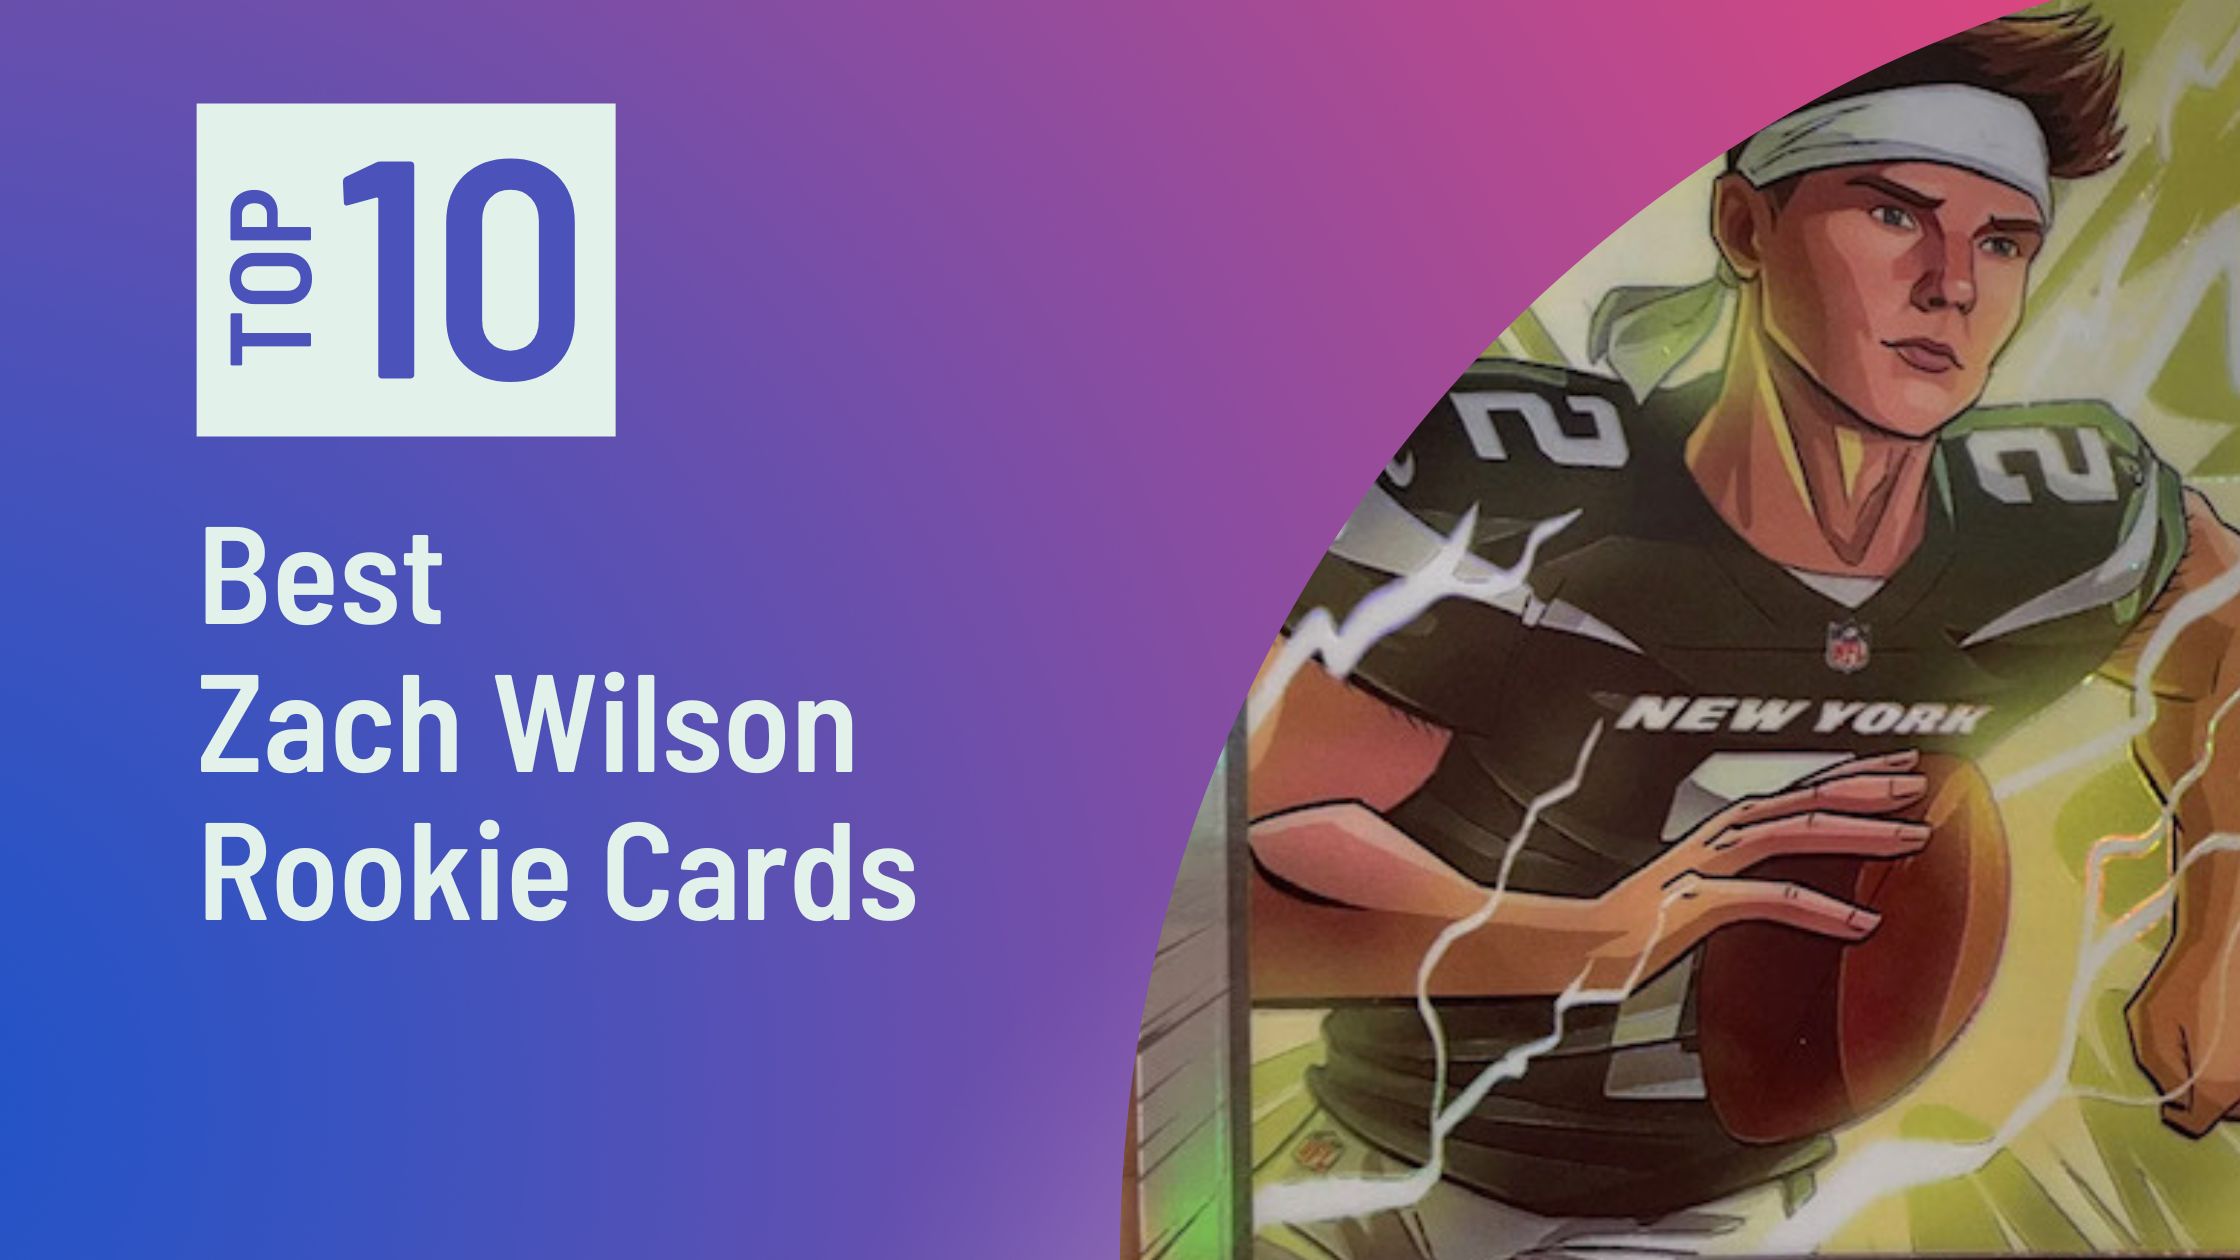 Featured image for the Best Zach Wilson Rookie Cards blog post on Sports Card Sharks